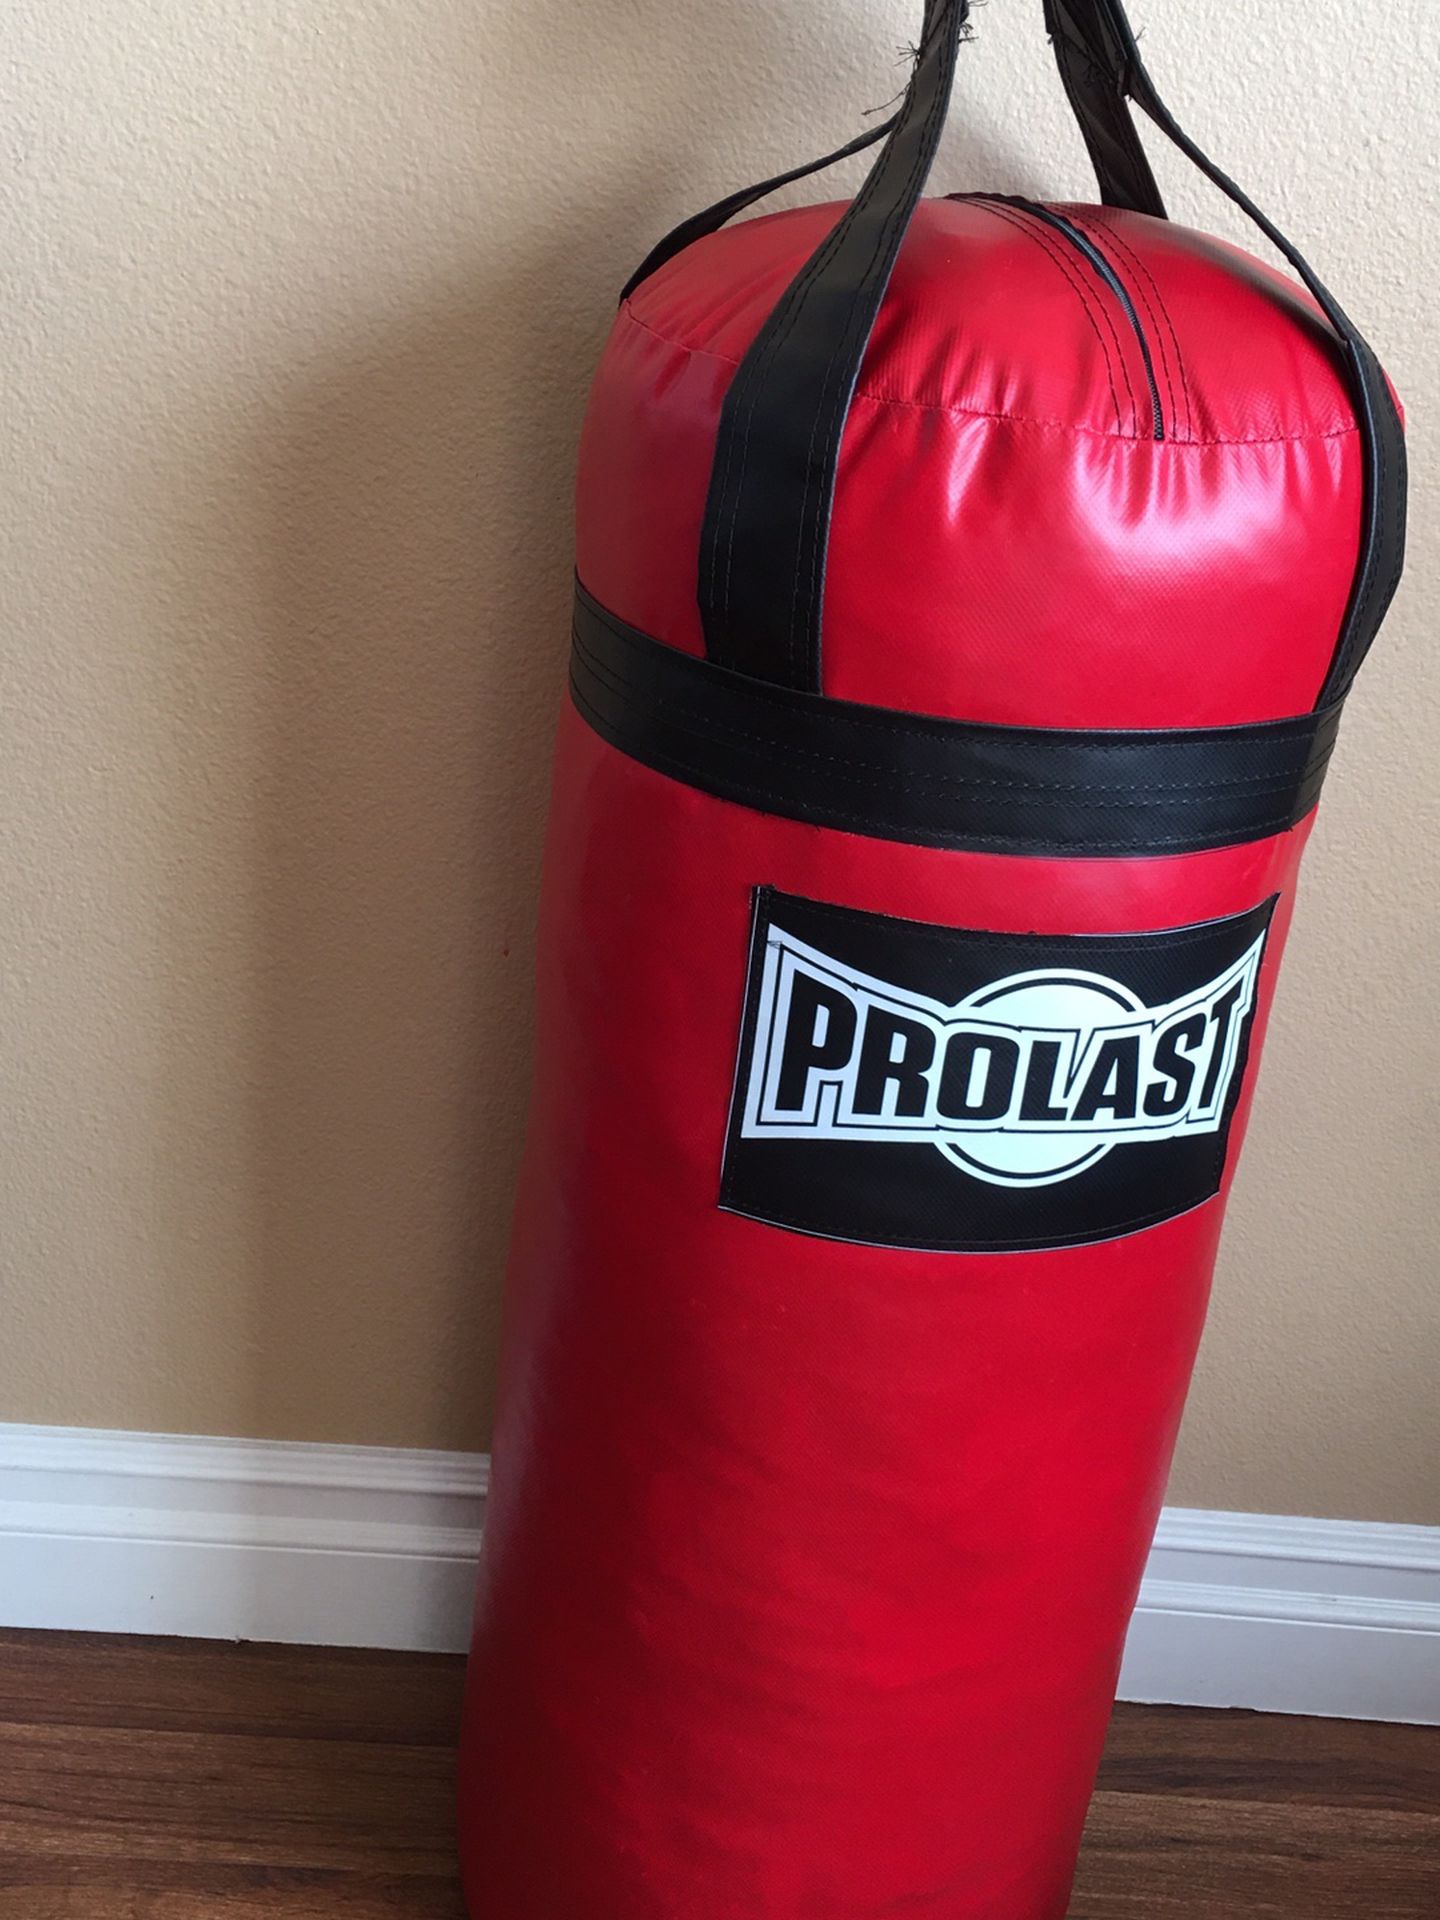 PUNCHING BAG BRAND NEW 100 POUNDS FILLED LUXURY MADE USA